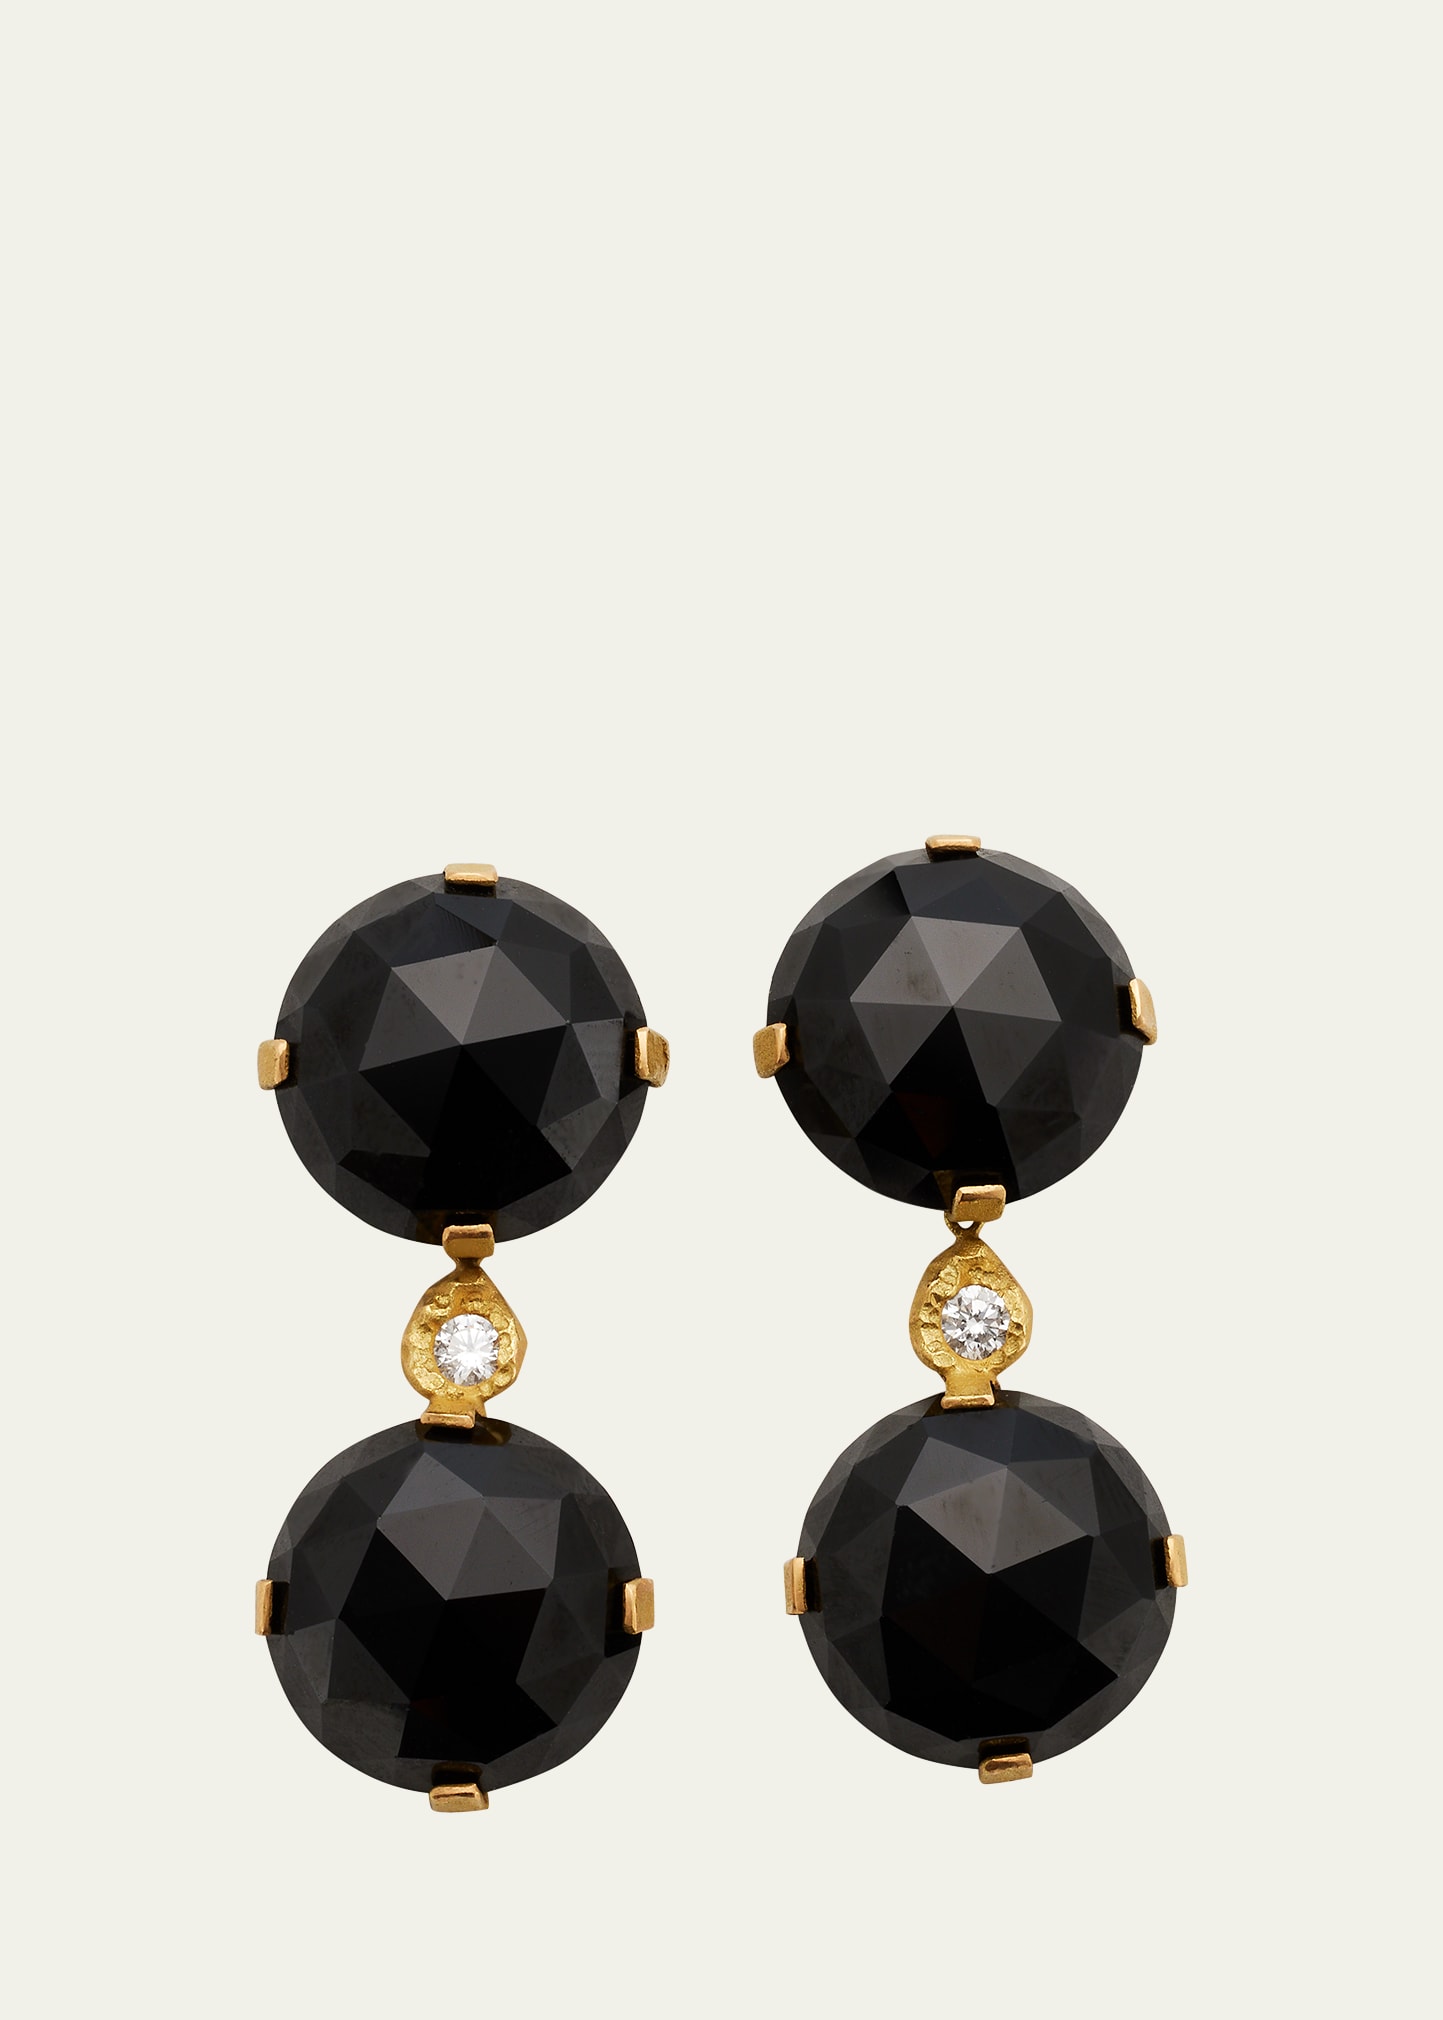 Elhanati Evita Big Earrings in 18K Solid Yellow Gold with Black Spinel and Top Wesselton VVS Diamonds